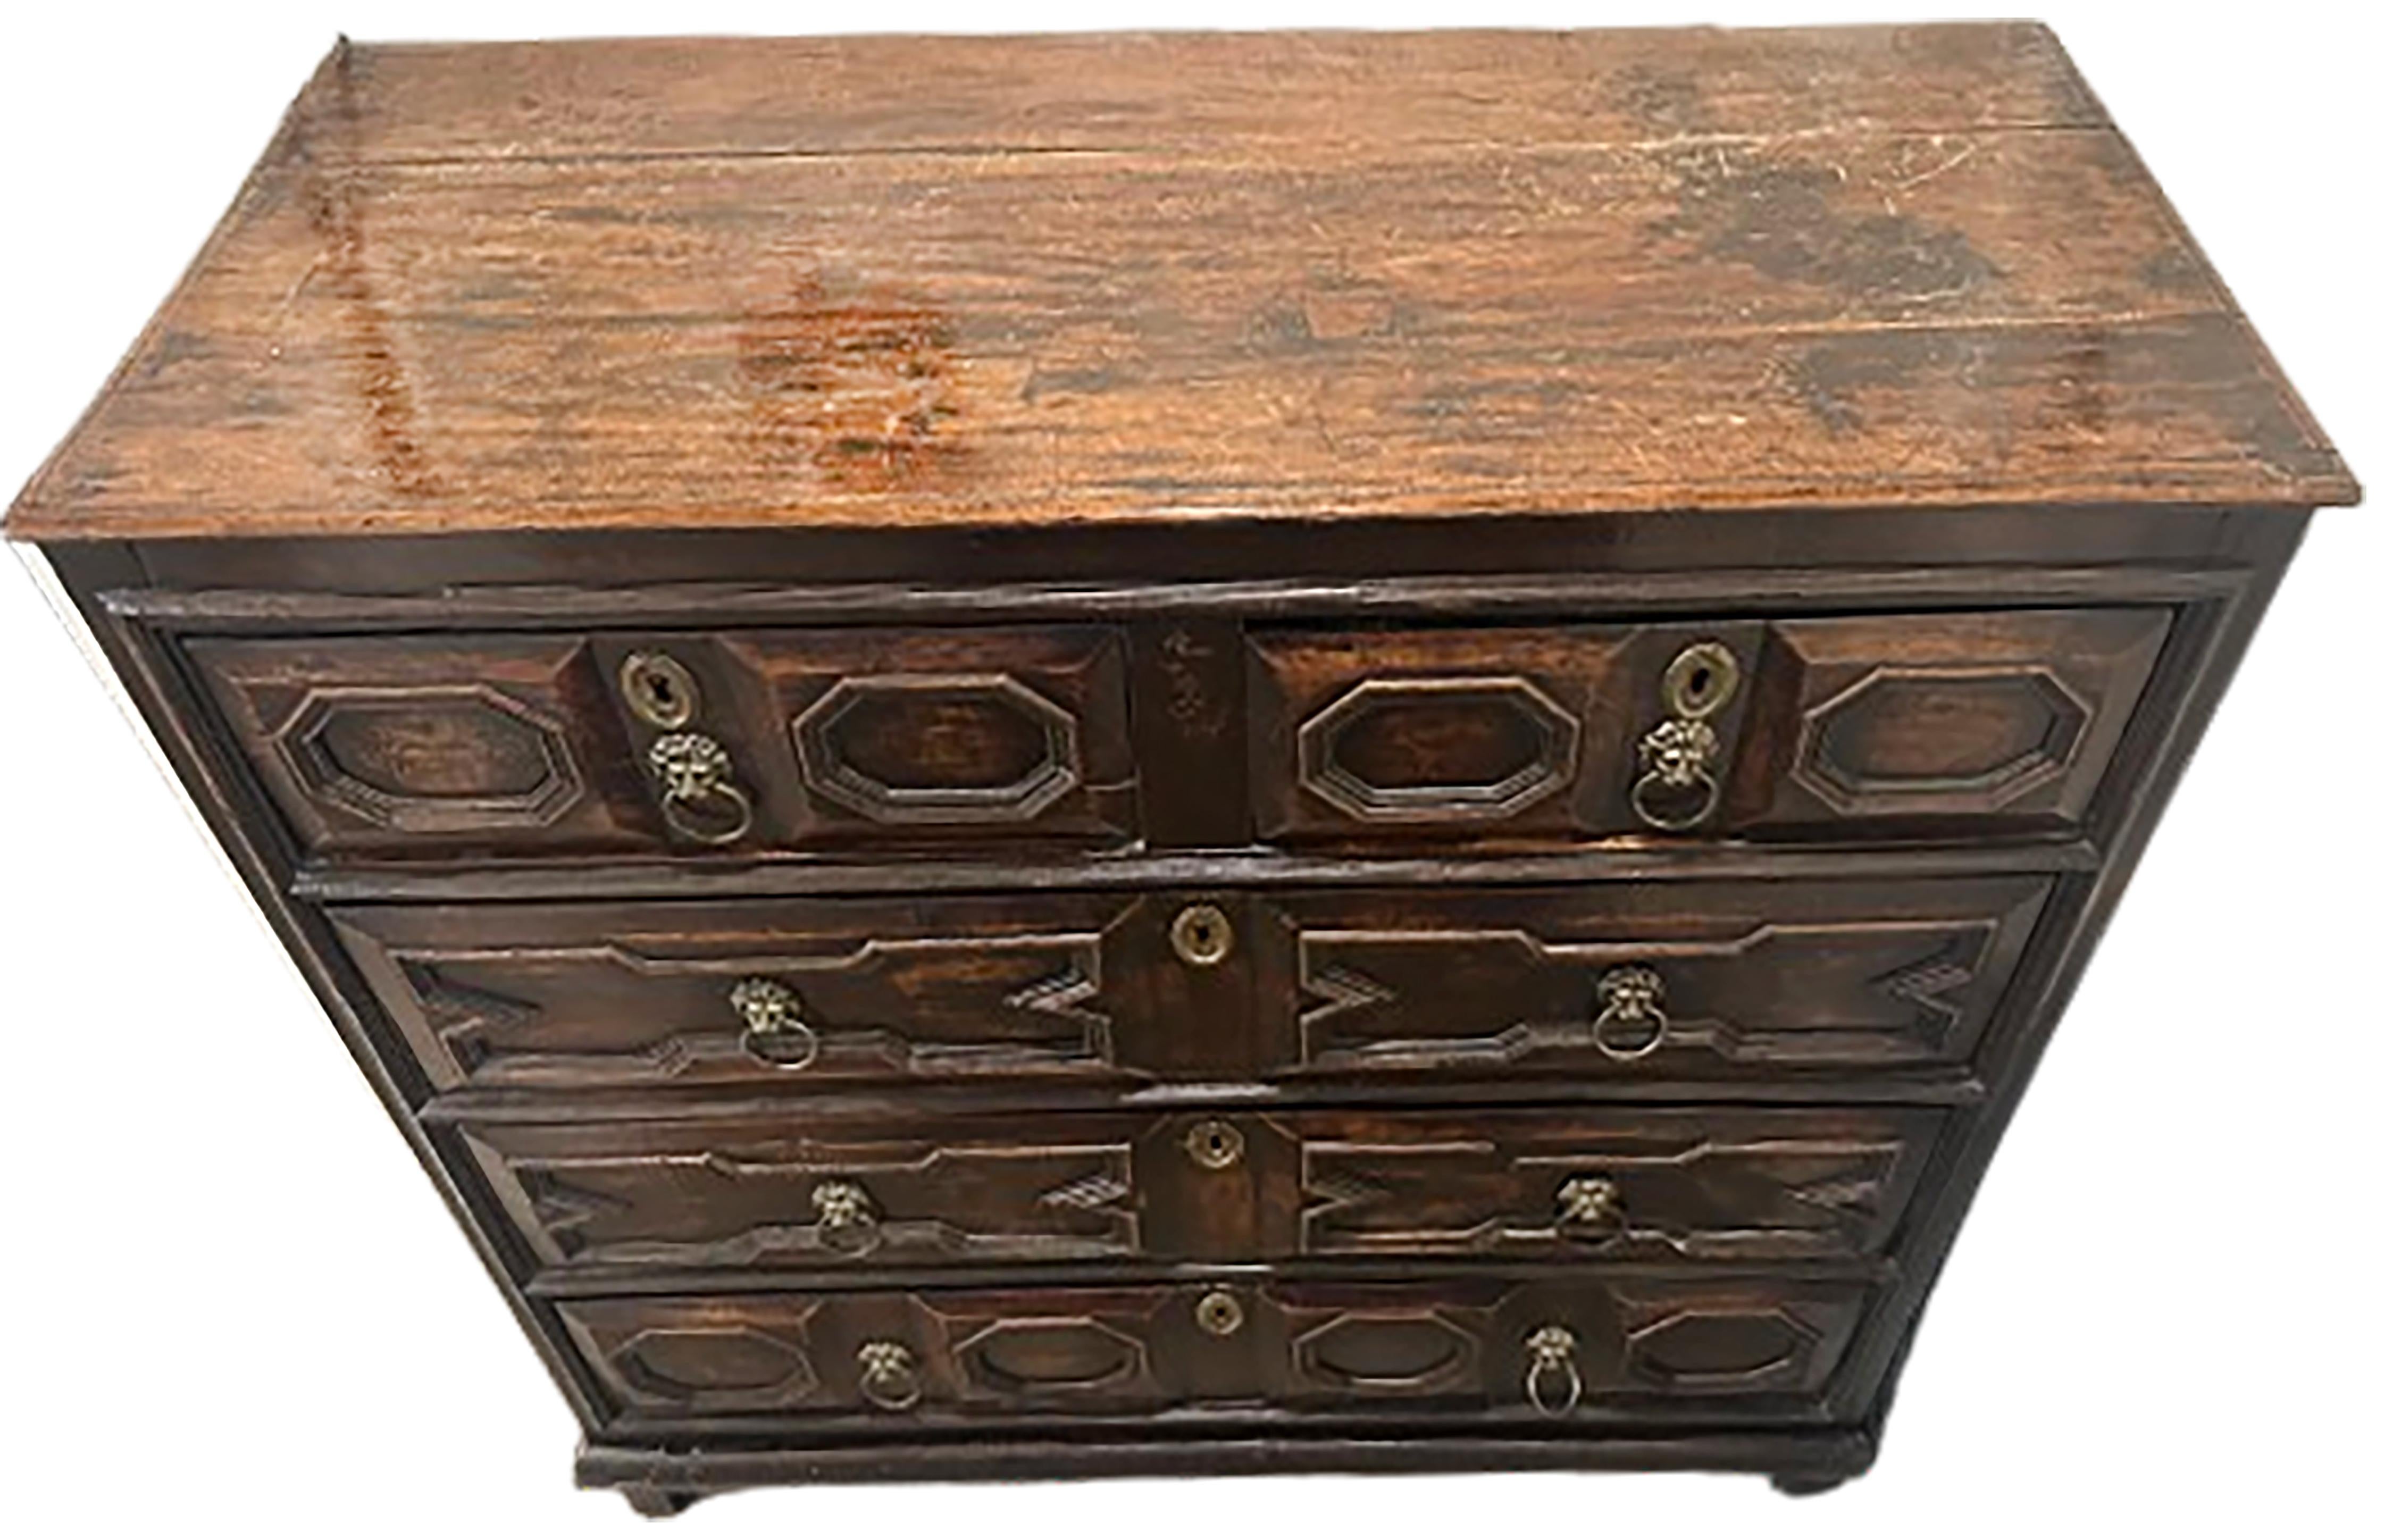 A handsome Jacobean chest of drawers. Four drawers. Made of Oak with lion face brass handles and key-holes. Made in England between the 17th-18th century. Beautiful dark brown finish. 

No obvious markings present on the piece.

In good condition.